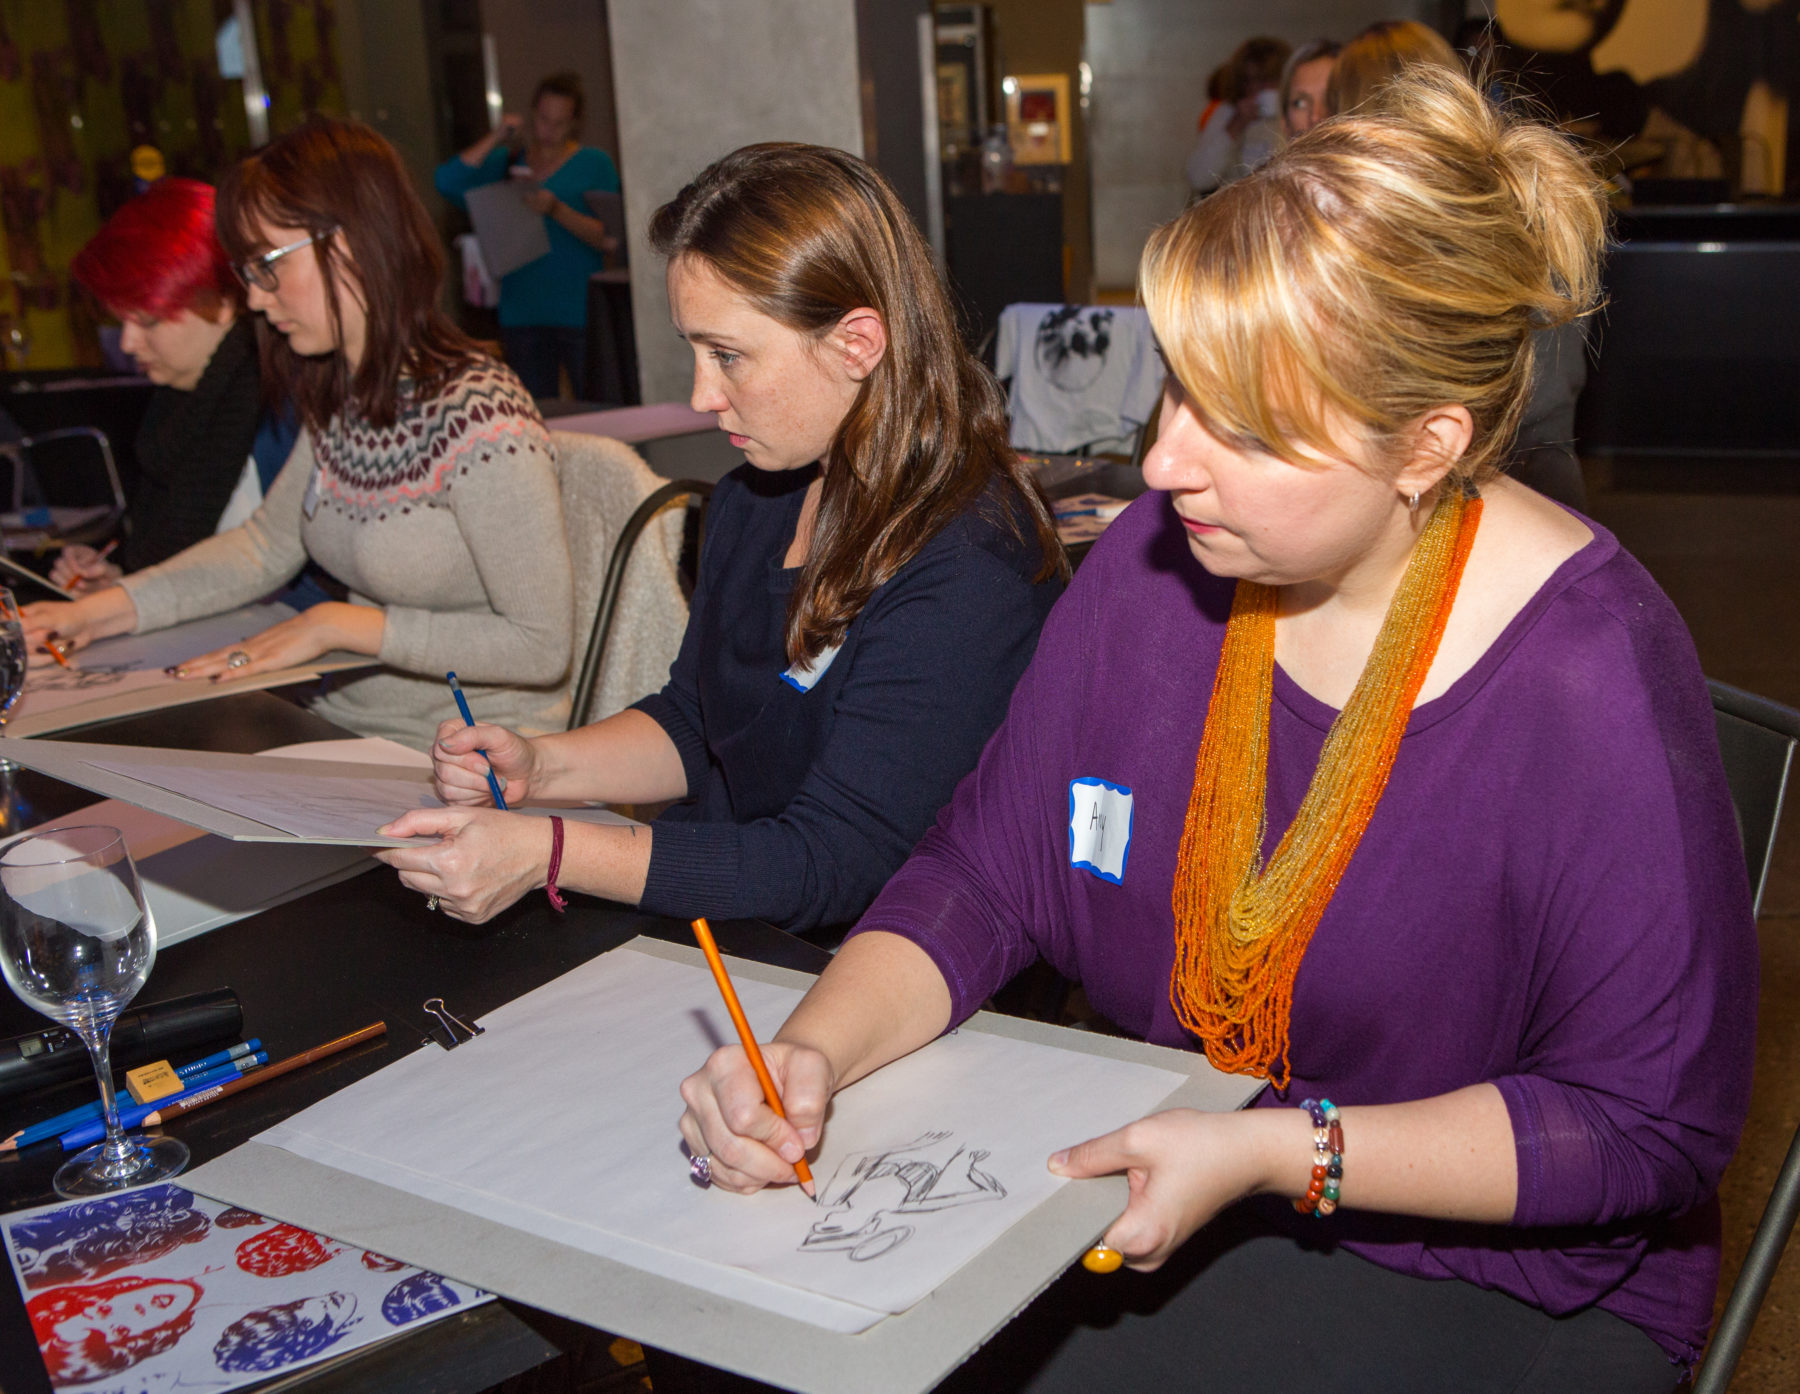 Four women sit at a long table sketching with pencil.